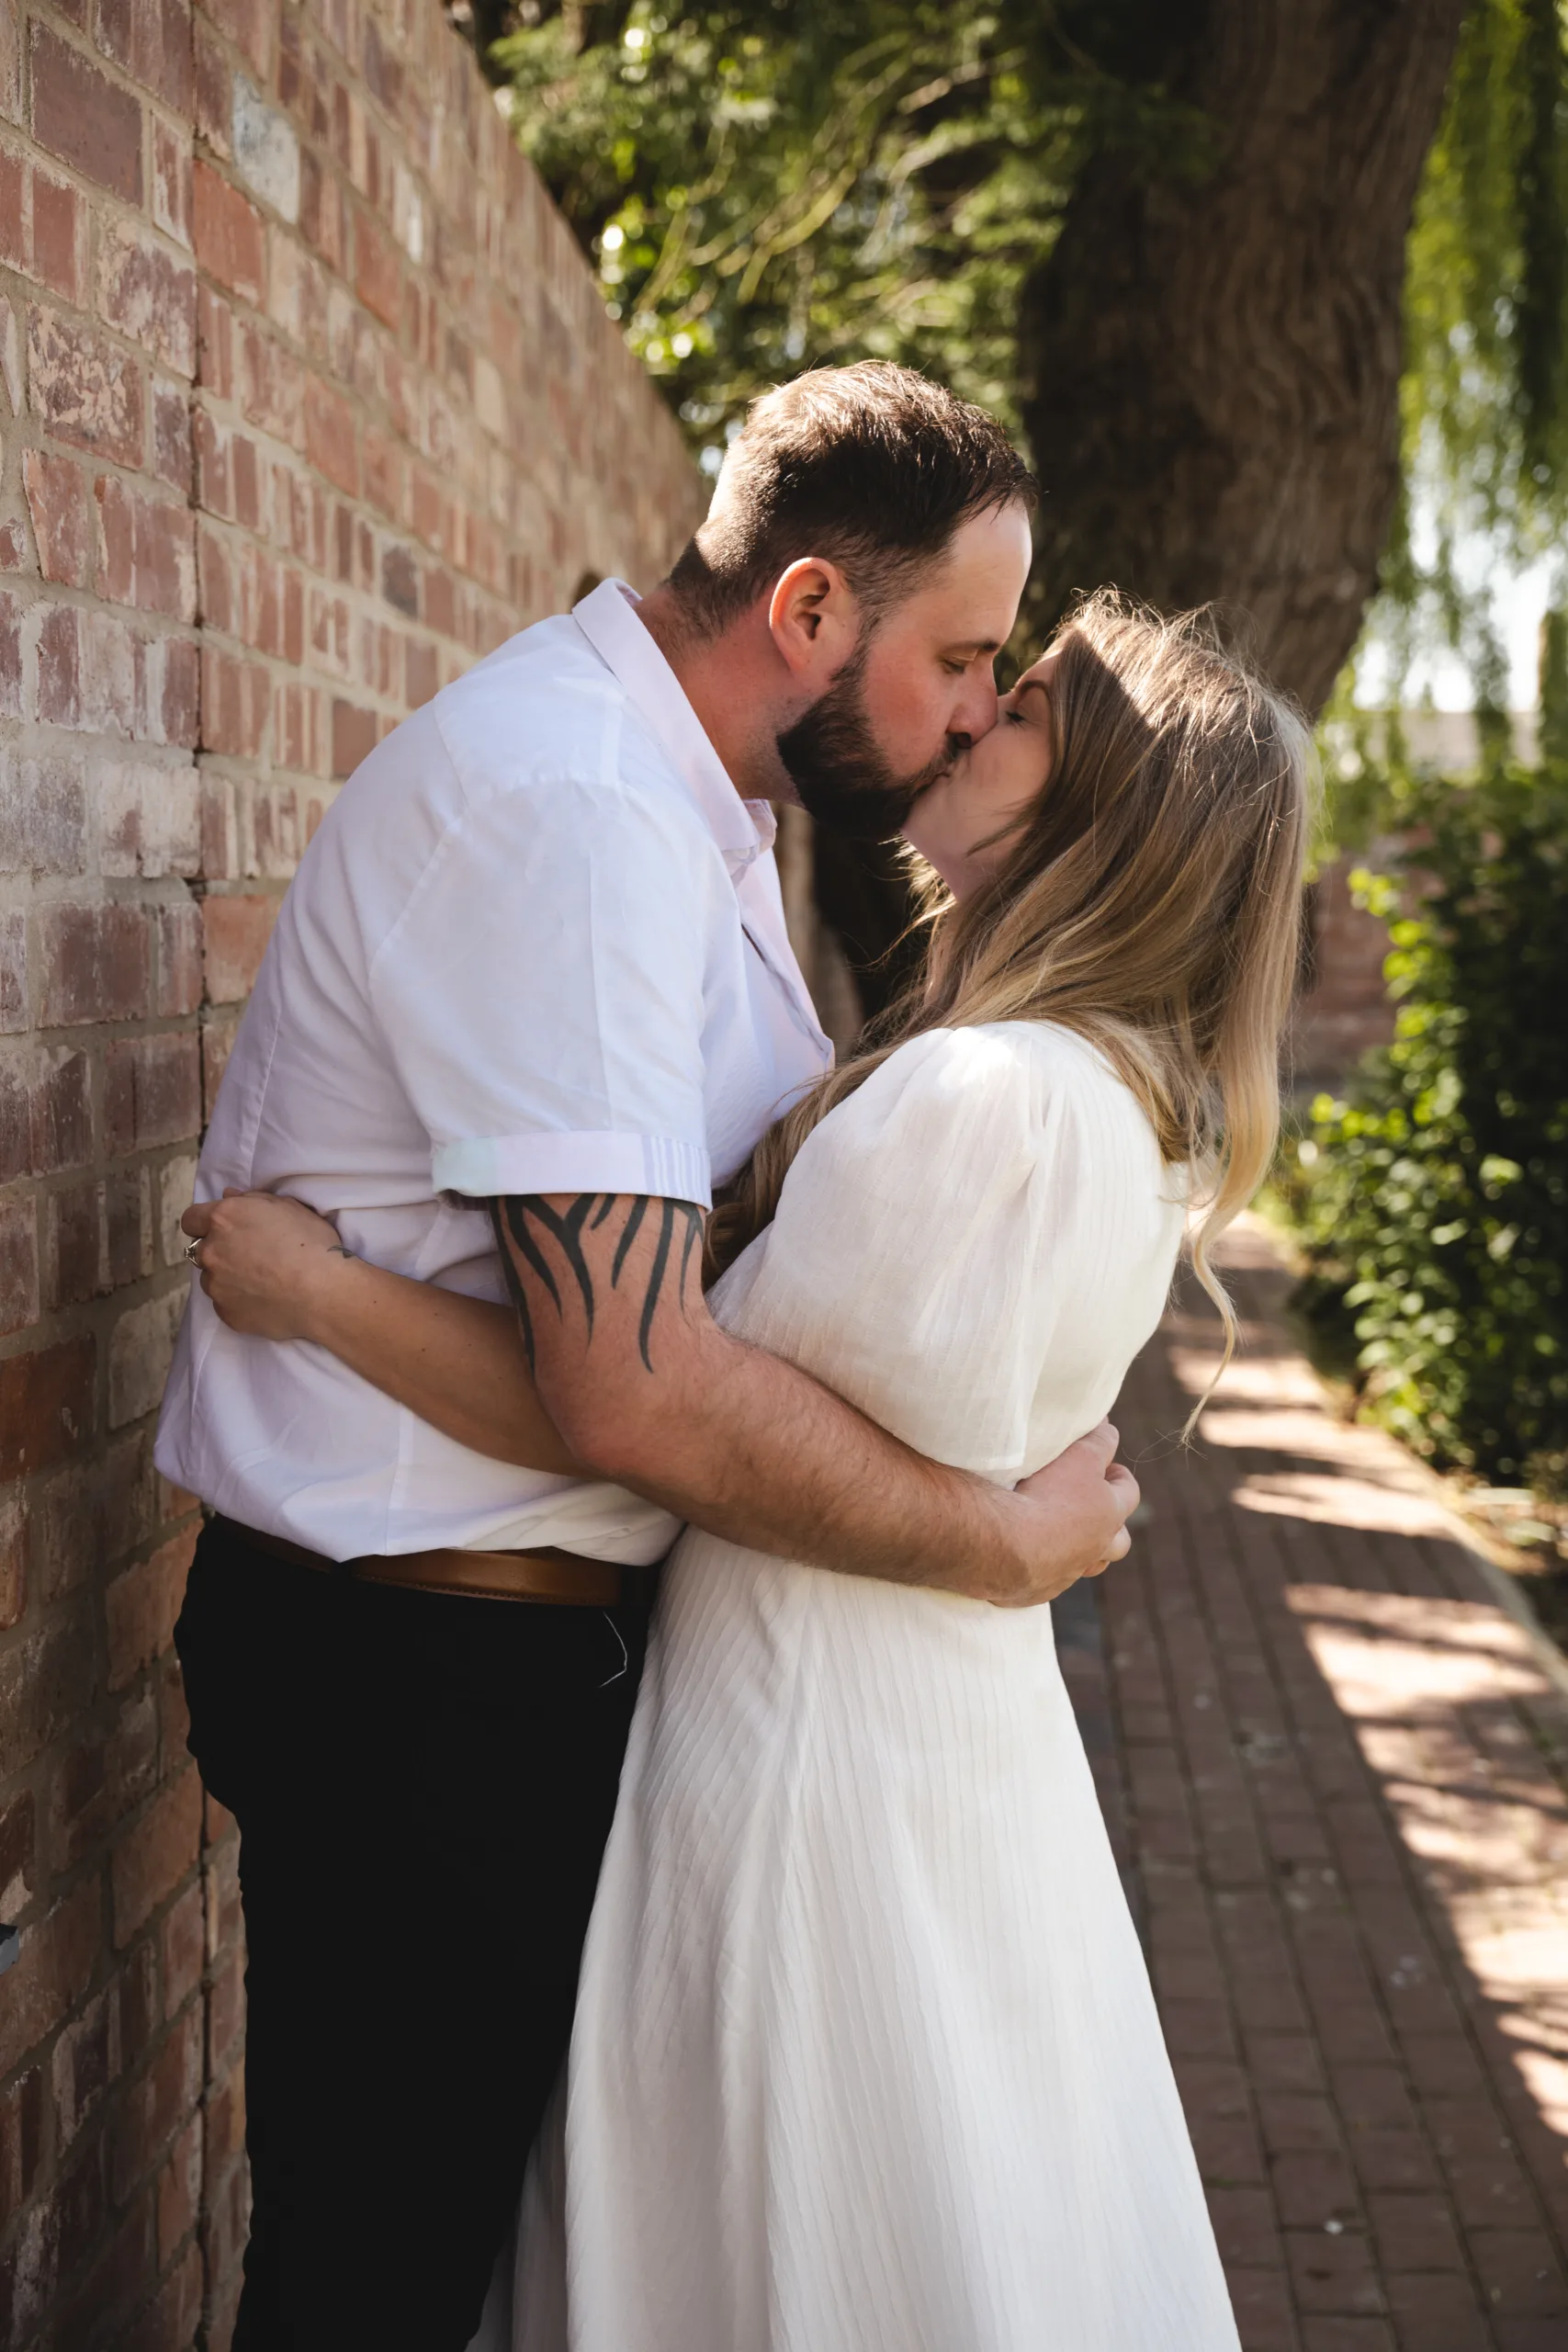 A couple in engagement photography attire share a romantic kiss in front of a brick wall.